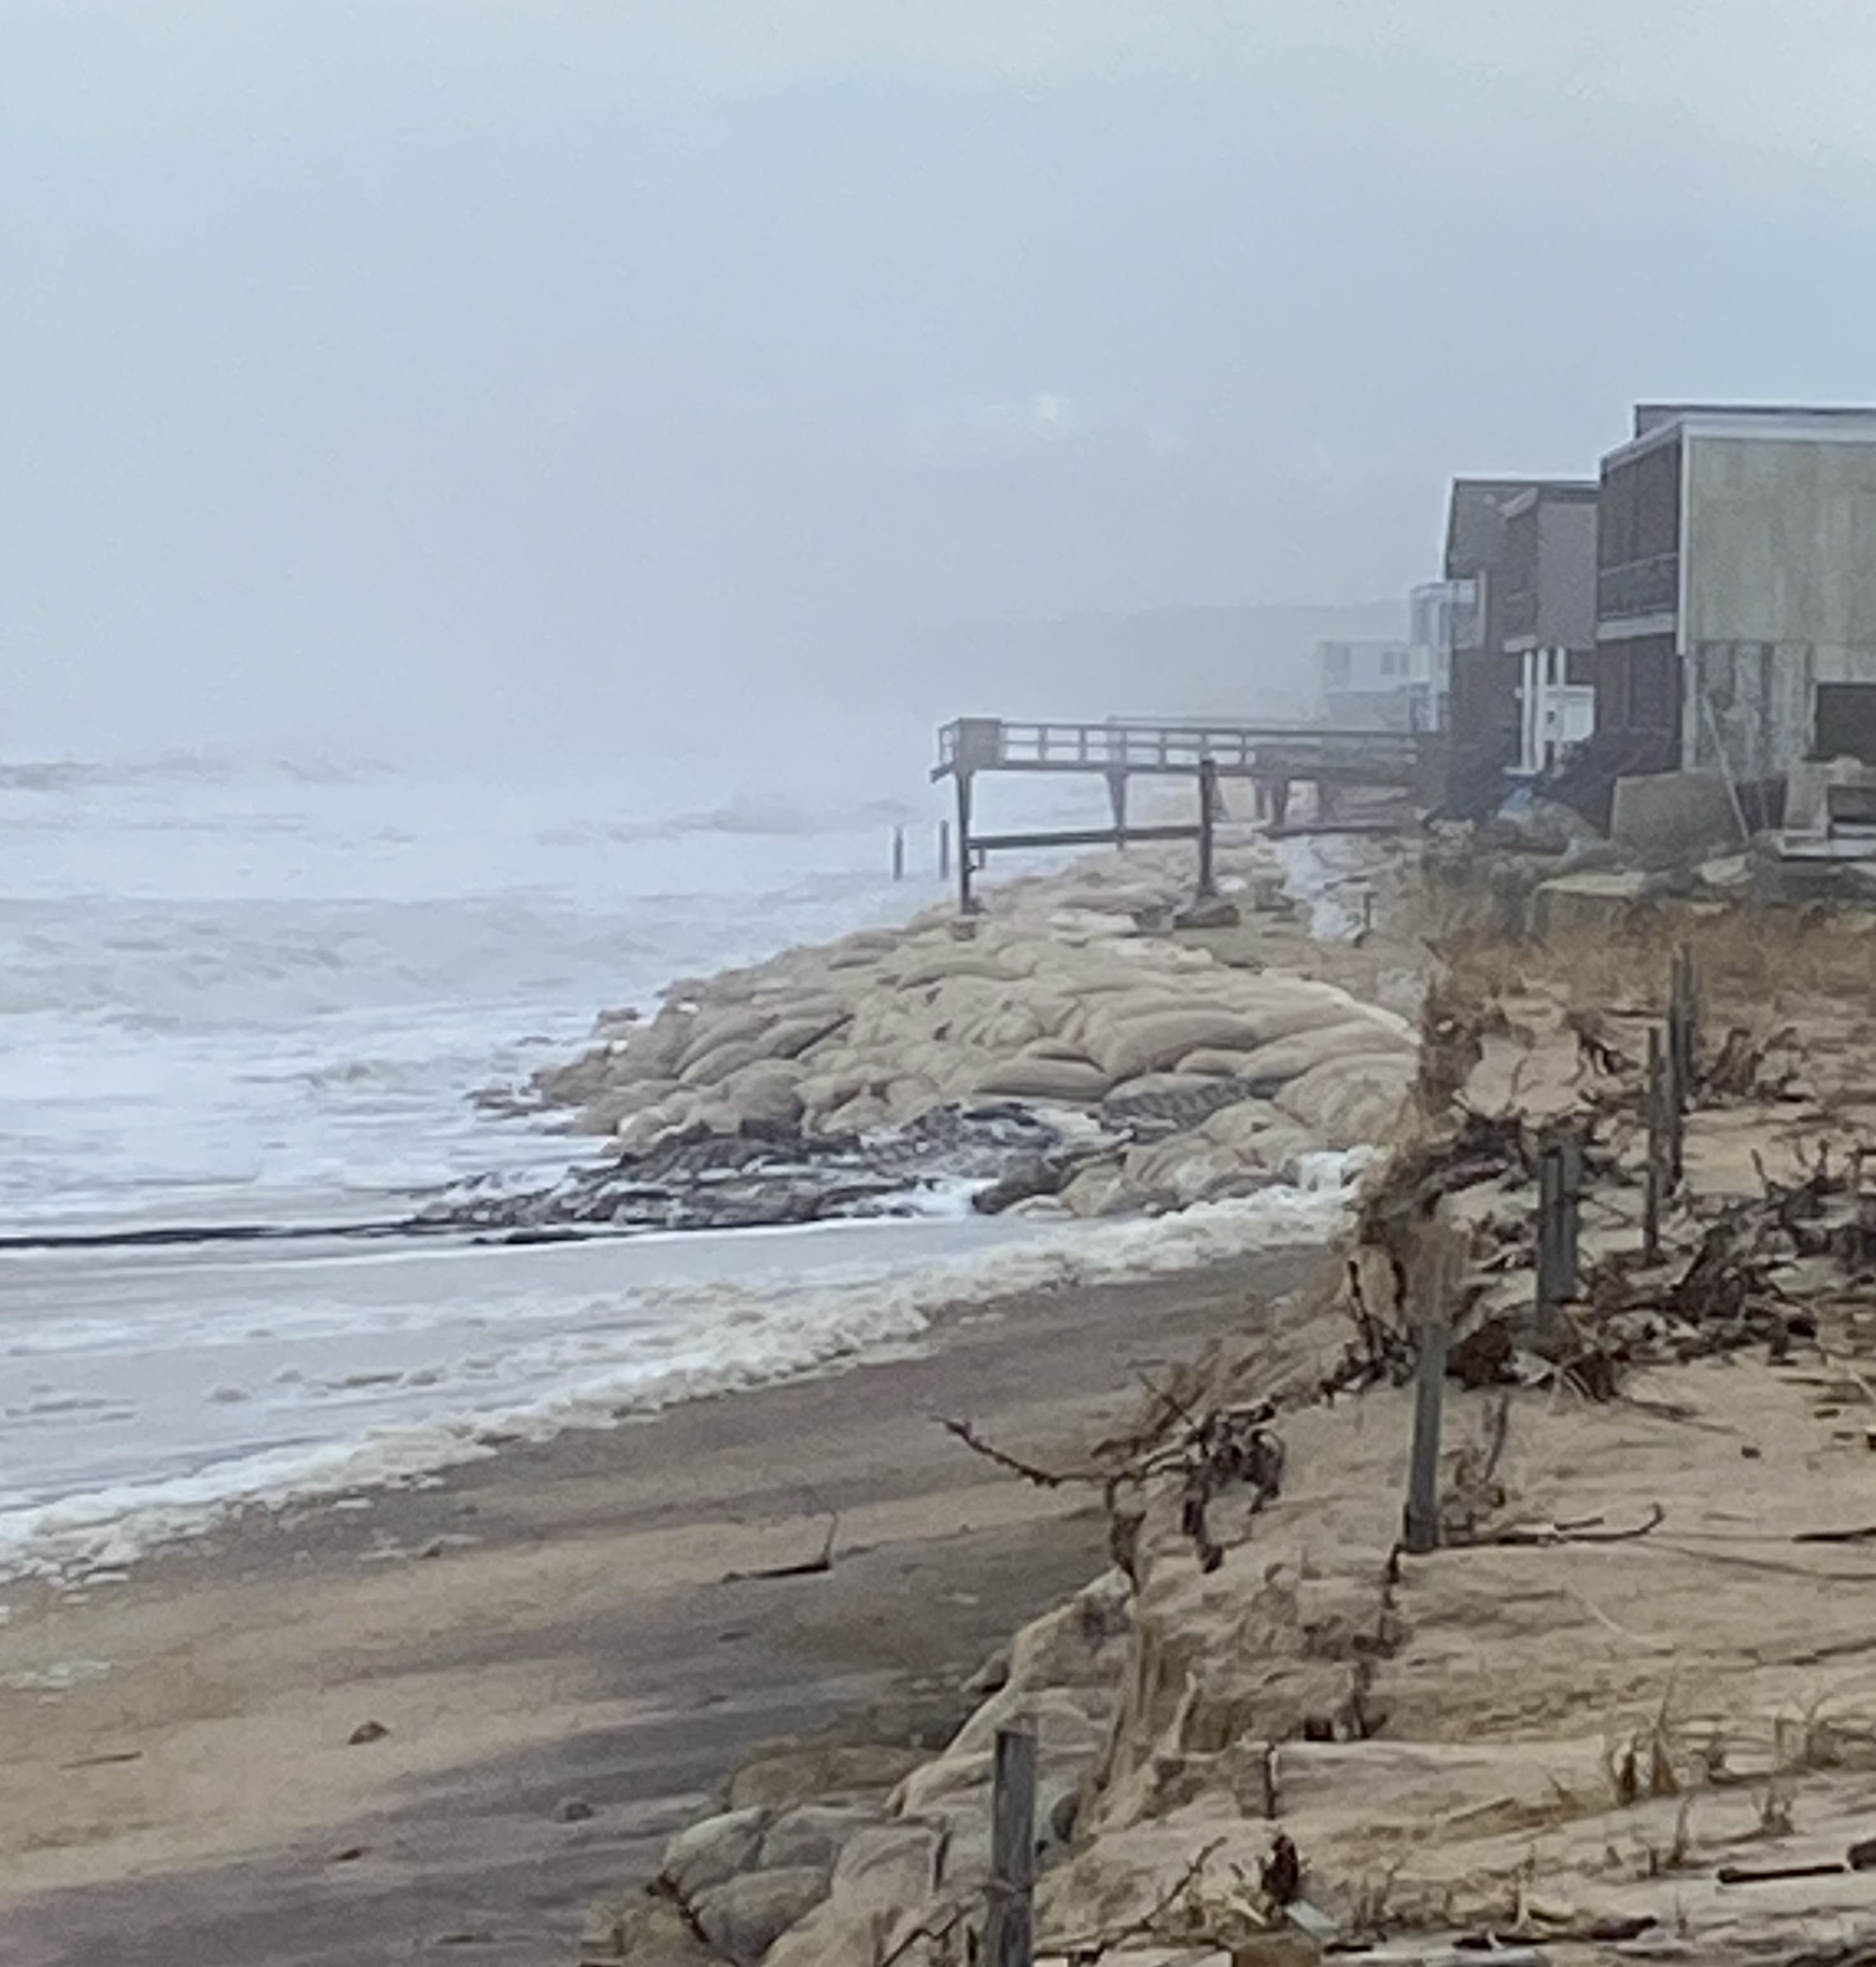 A resilient hamlet hit by four storms: Finding long-term solutions for a coastal community